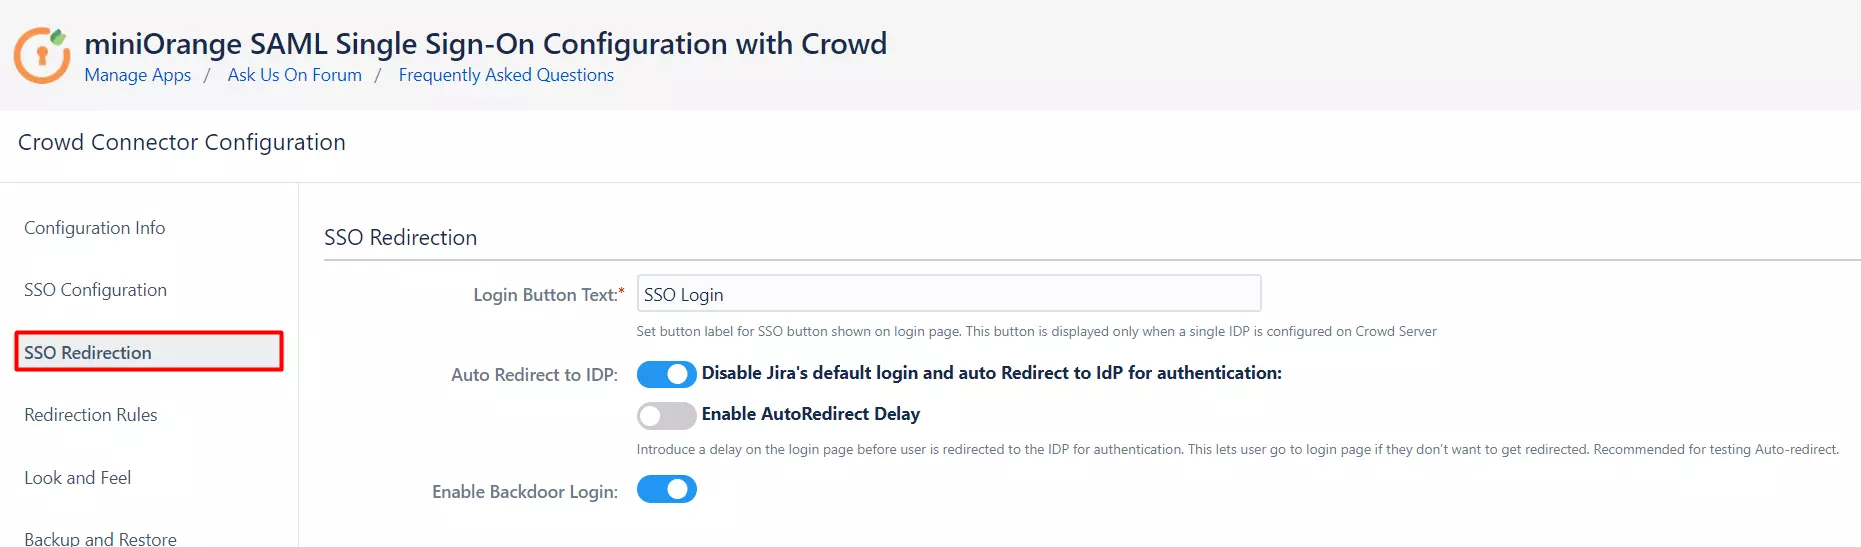 SAML Single Sign On (SSO) Connector for Crowd and Confluence, SSO Redirection